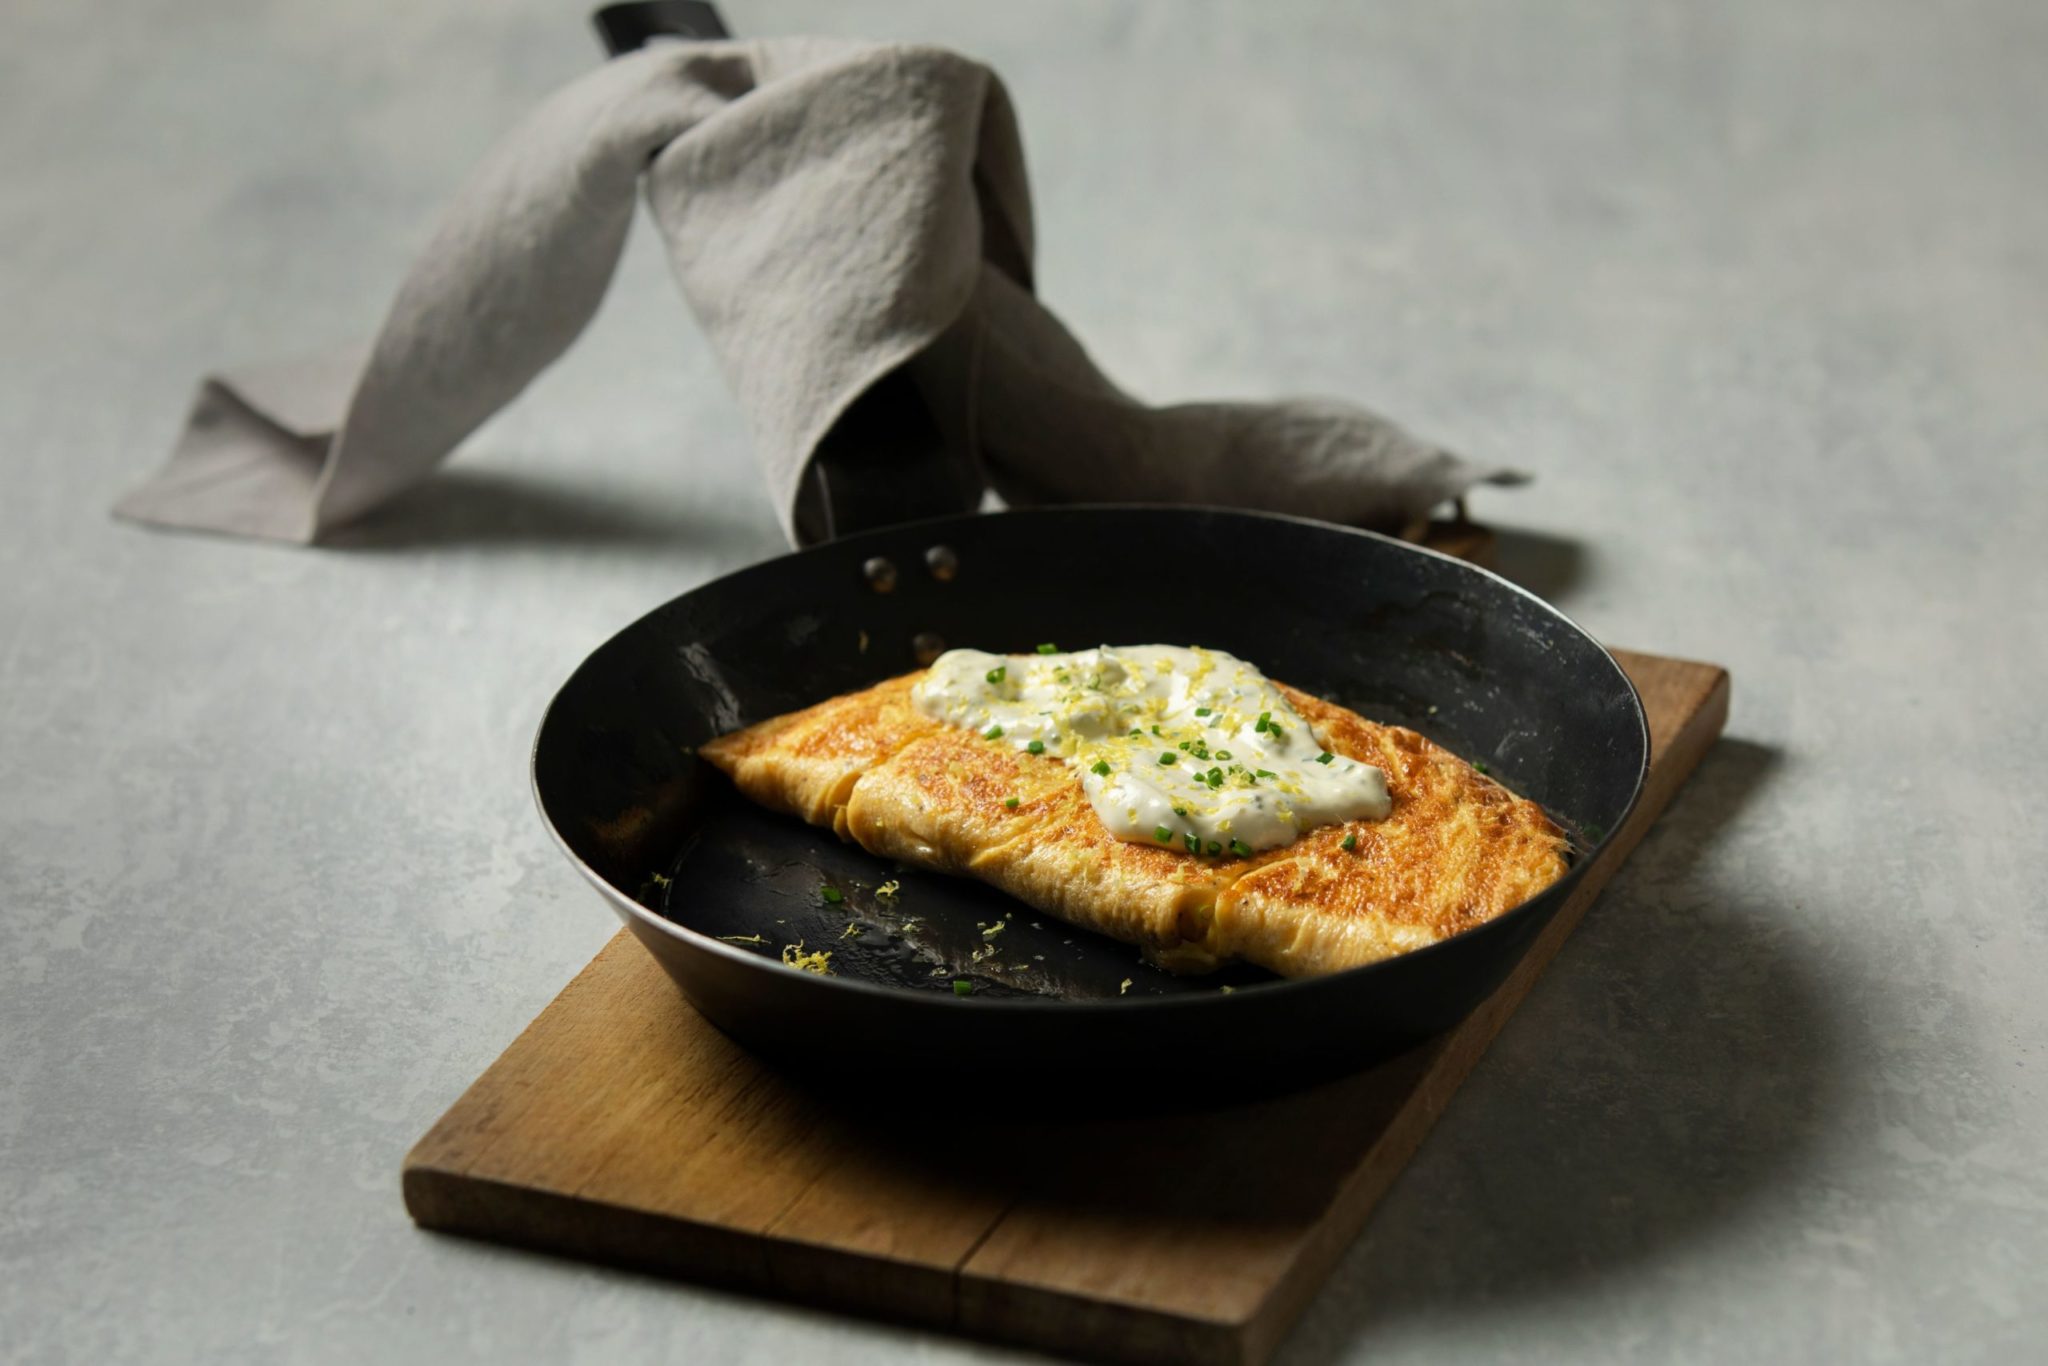 Heston Blumenthal’s smoked Murray cod omelettes